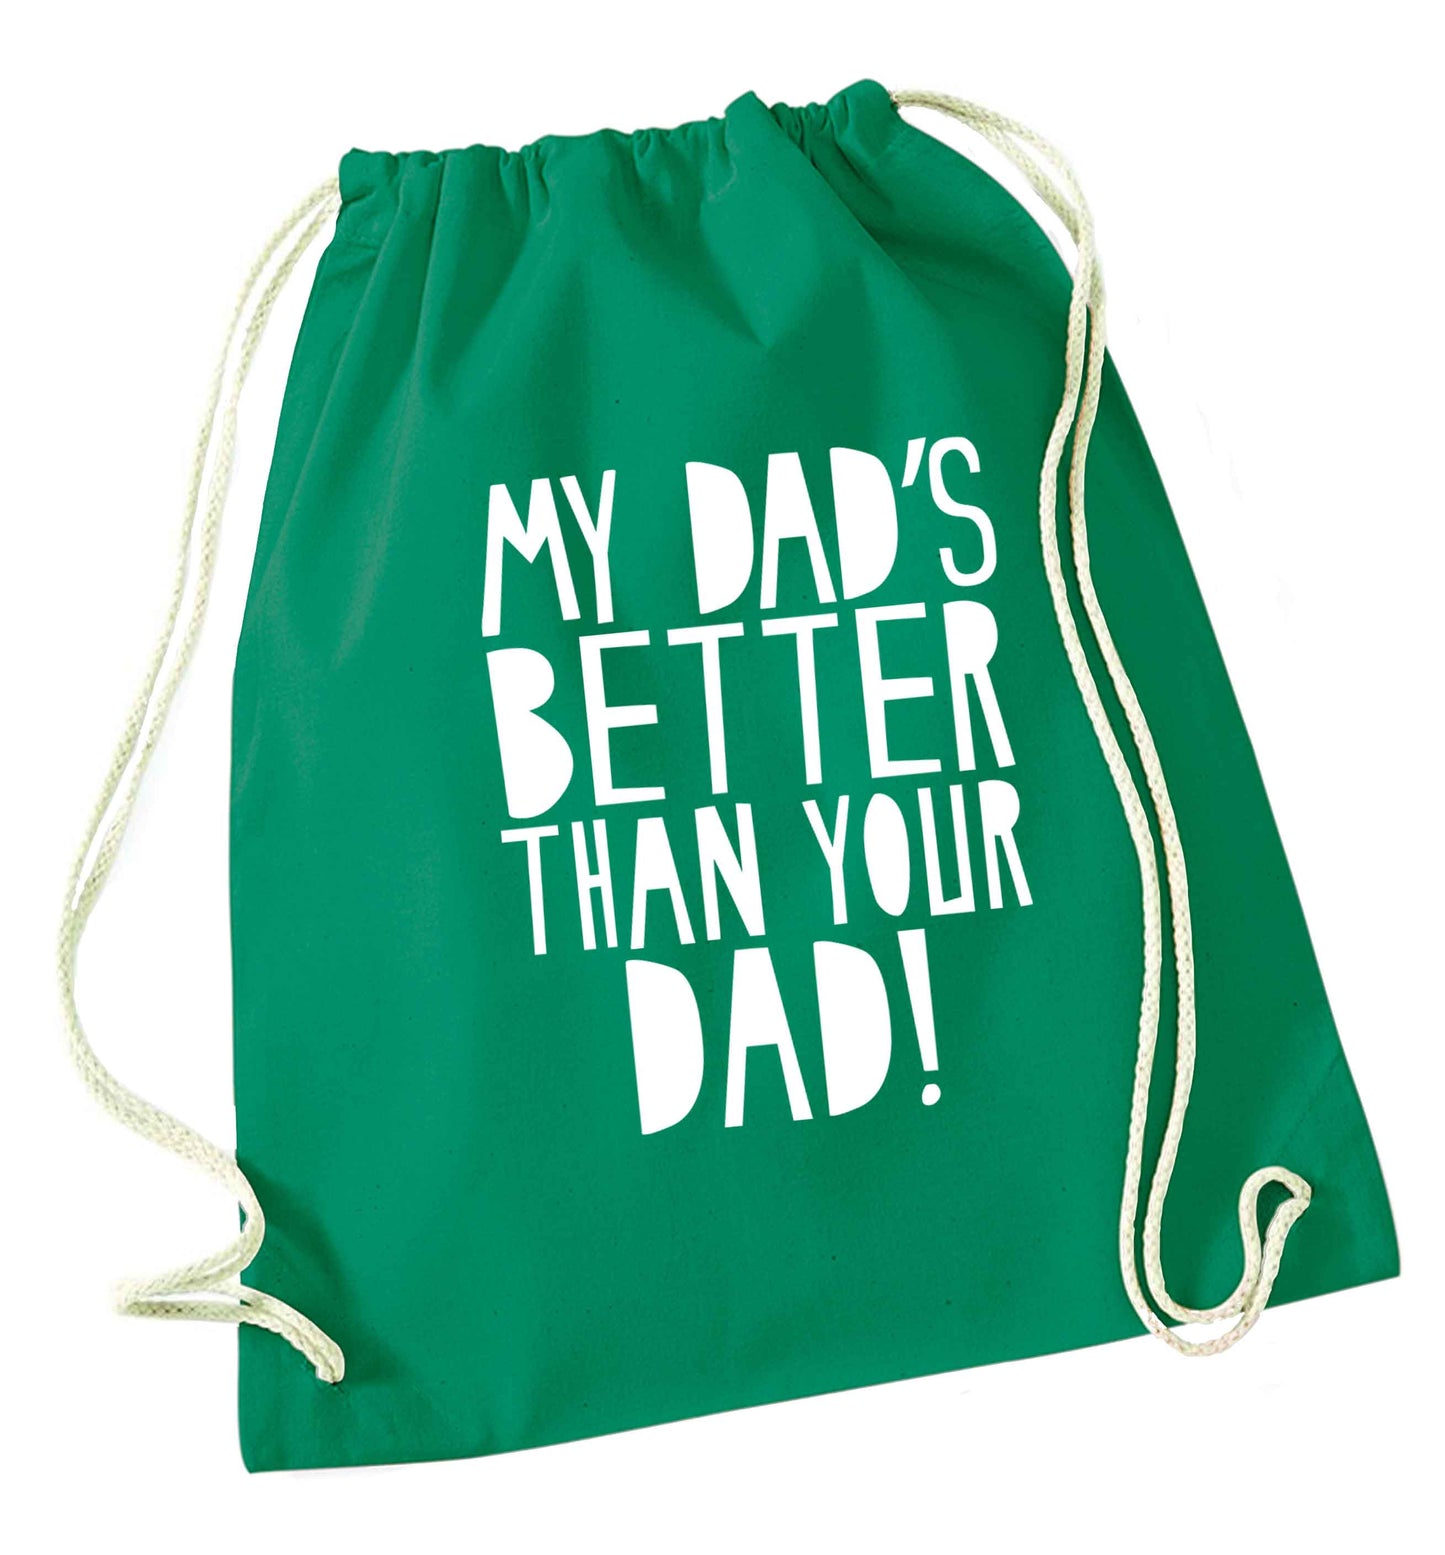 My dad's better than your dad! green drawstring bag